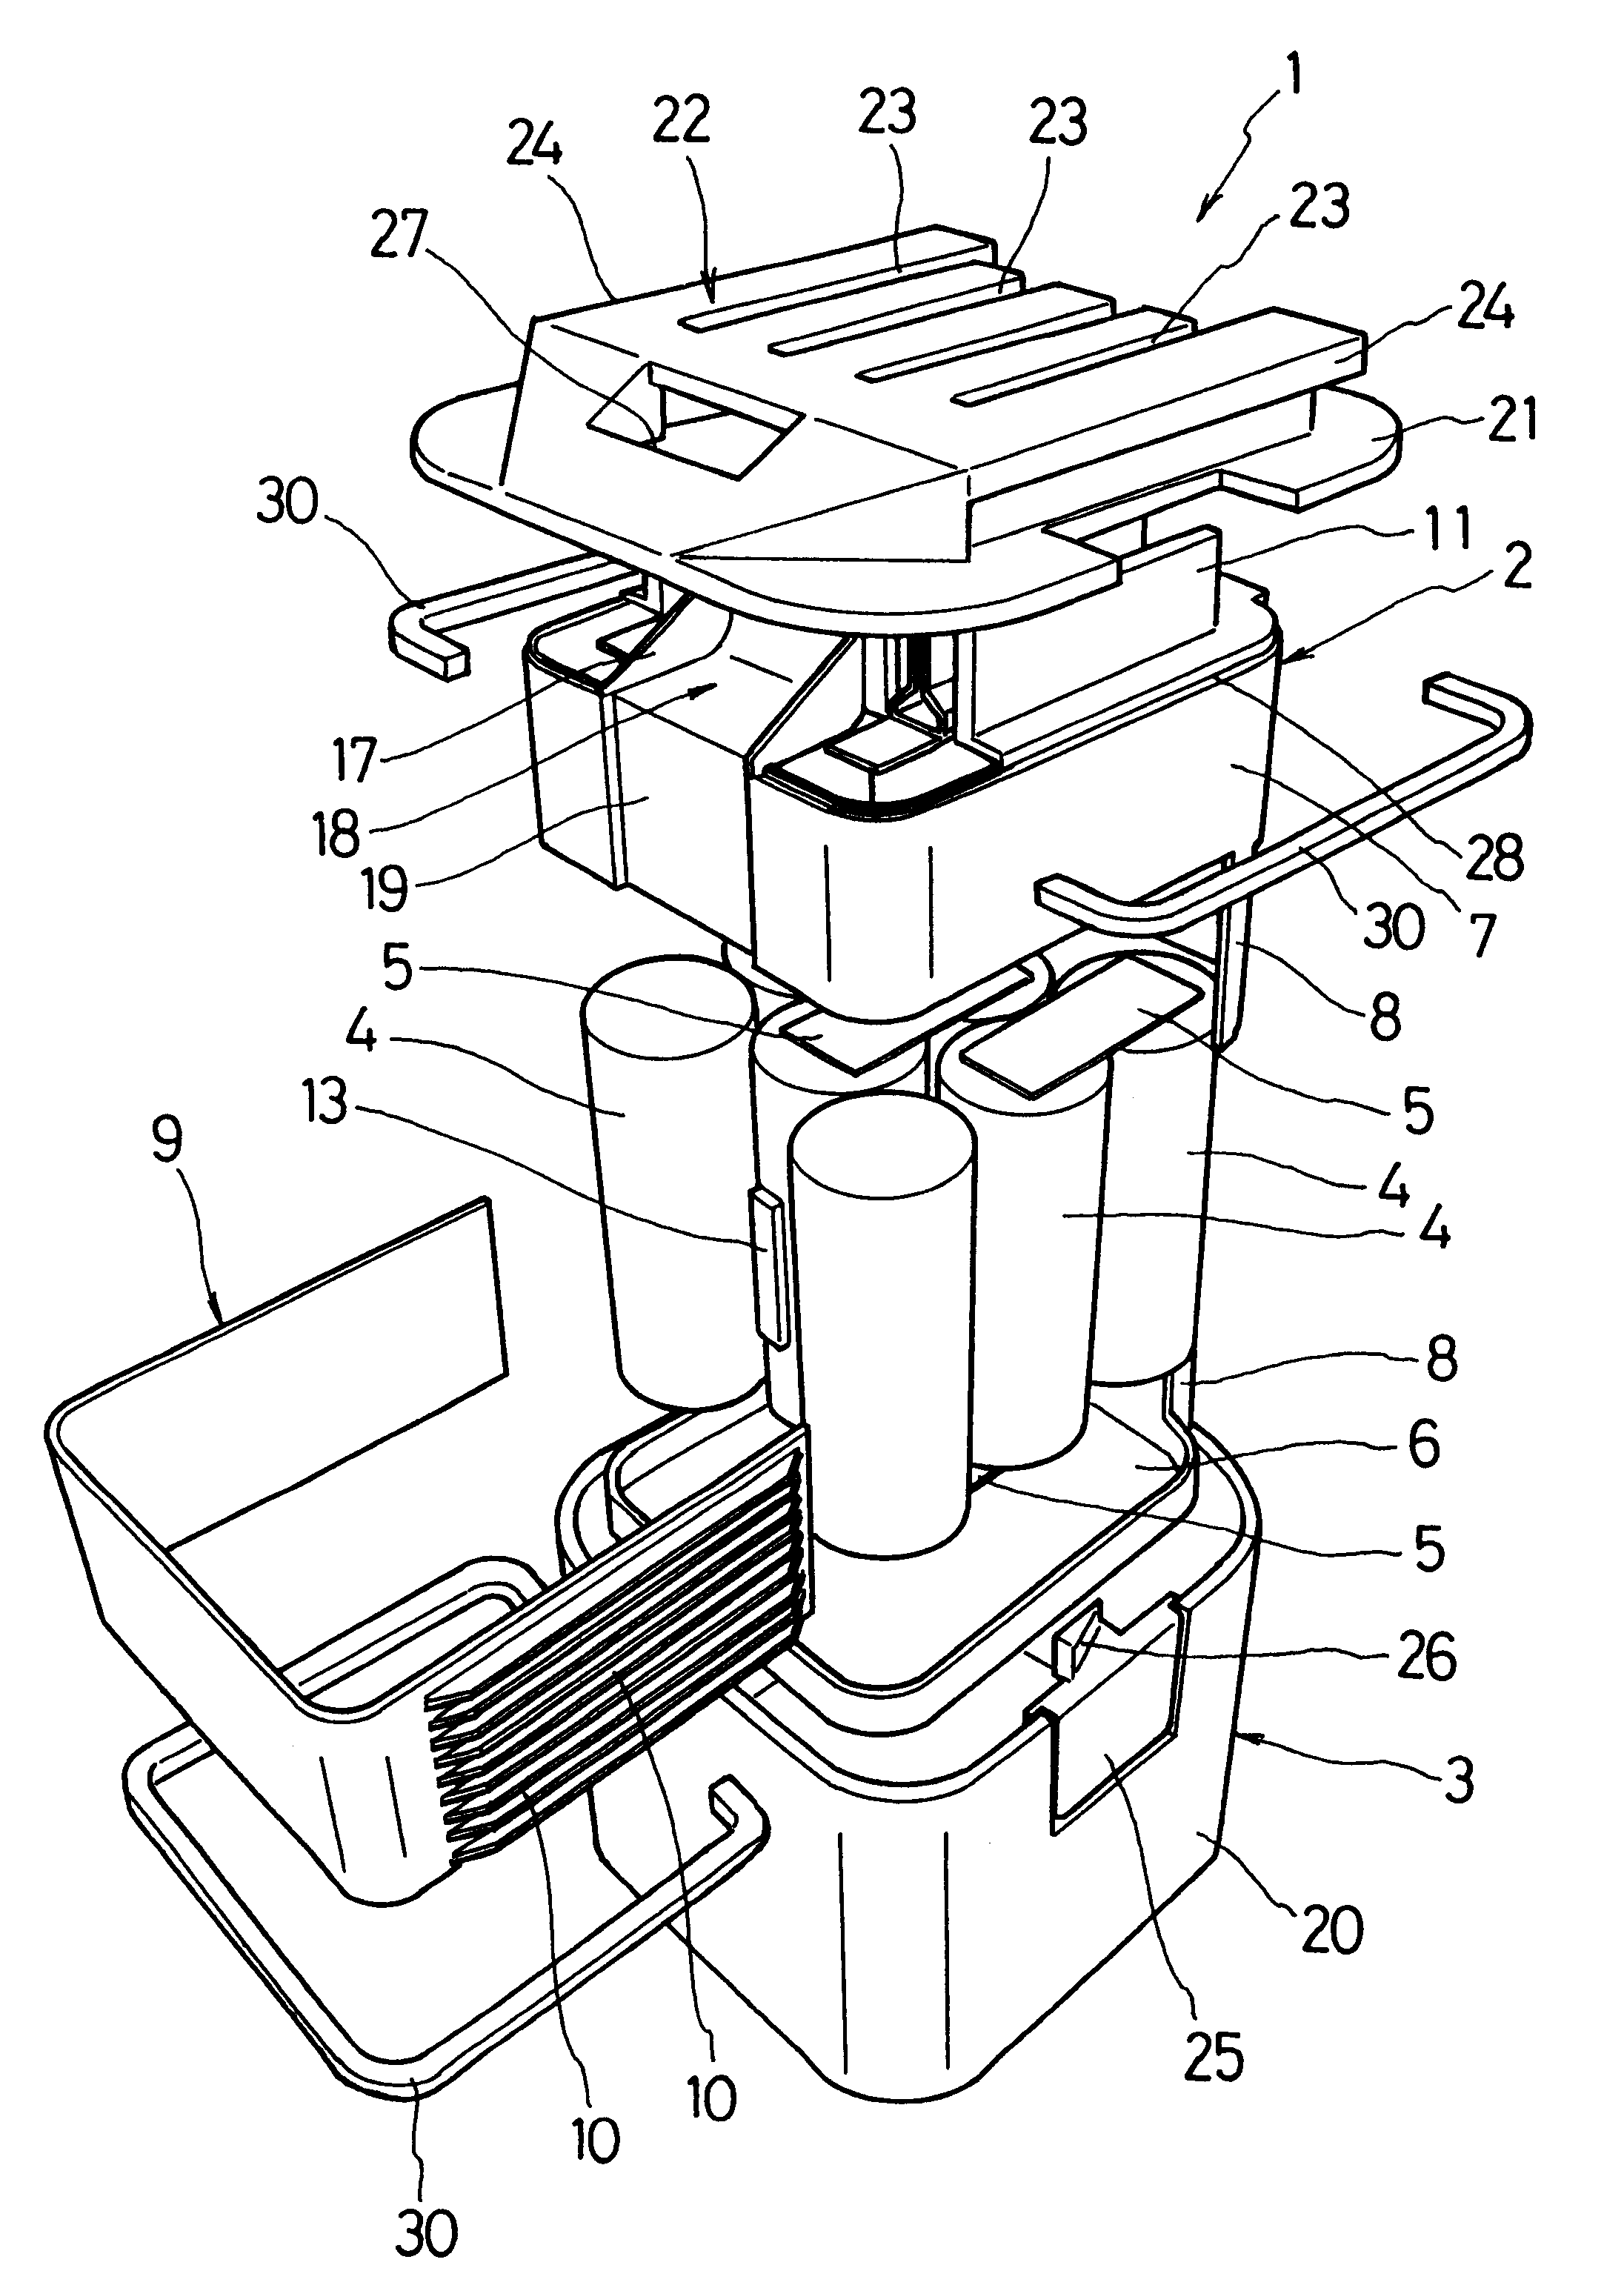 Battery pack with improved heat radiation and sealing